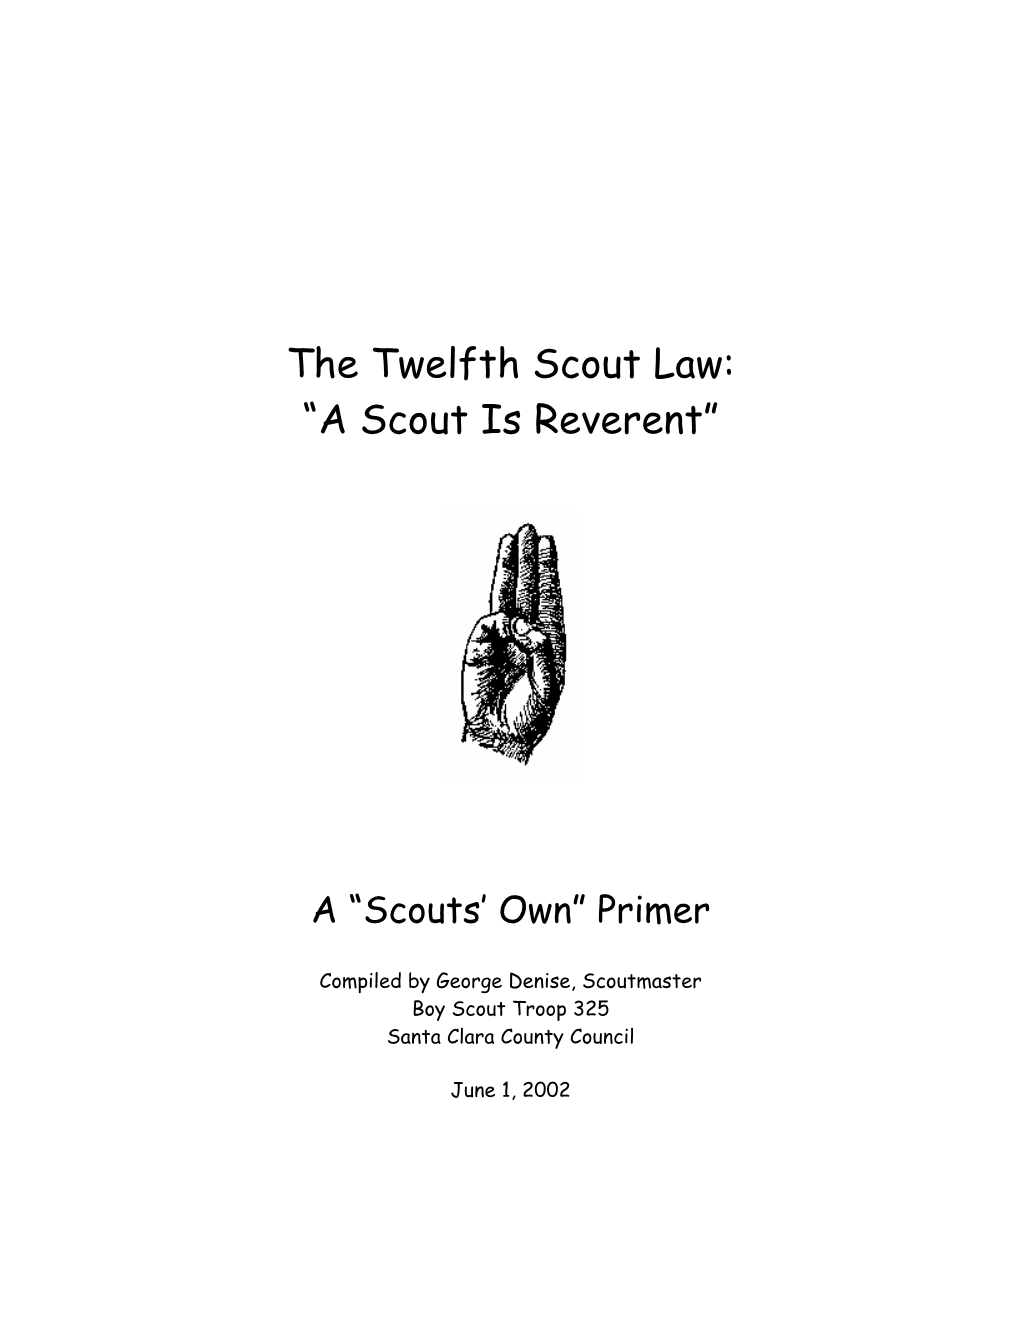 The Twelfth Scout Law: “A Scout Is Reverent”